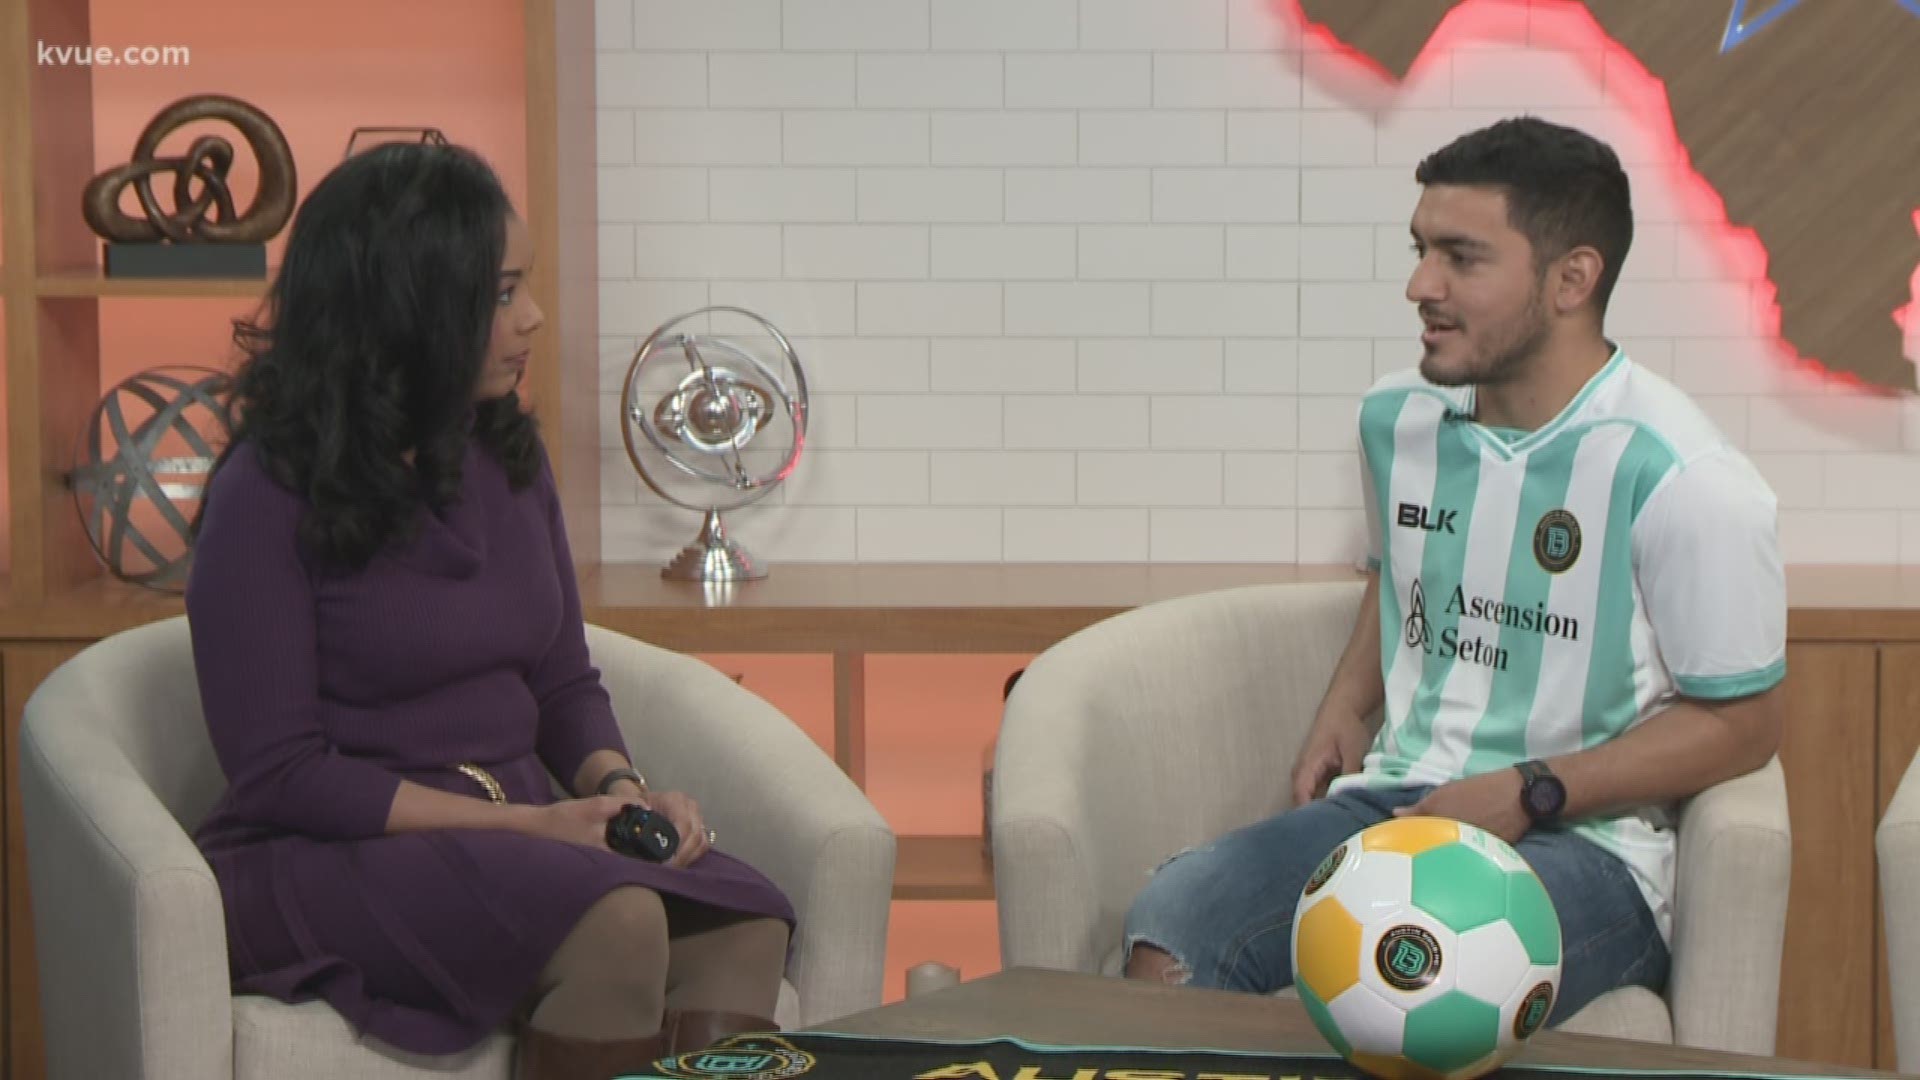 The inaugural match for one of Austin's soccer teams – Austin Bold FC – is this month! And team members are going in with new uniforms. Midfielder Sonny Guadarrama is here to talk about what we can expect this season.